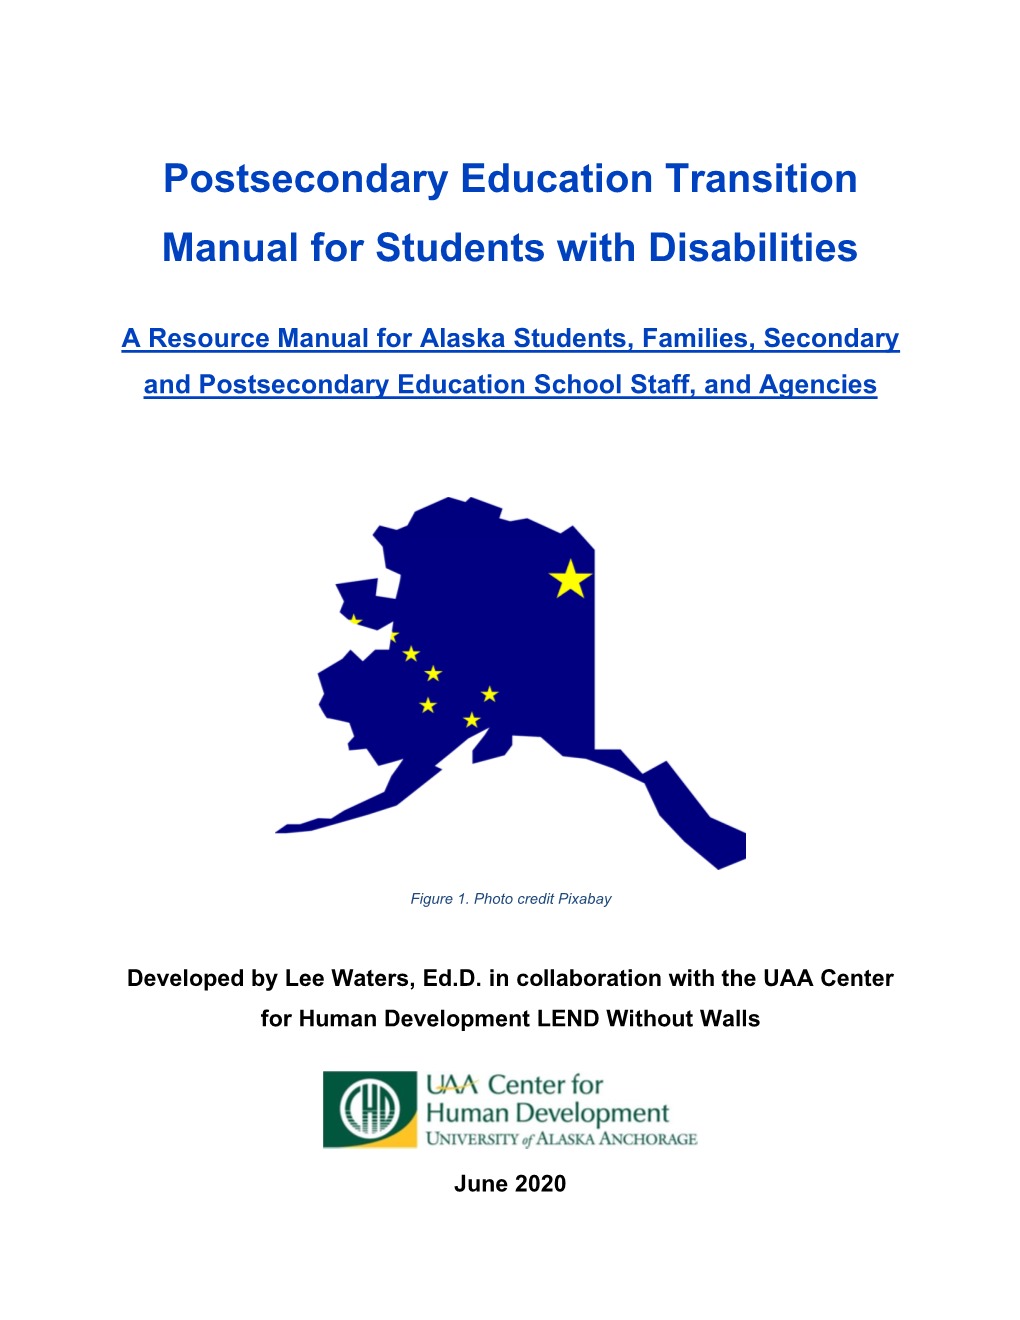 Postsecondary Education Transition Manual for Students with Disabilities